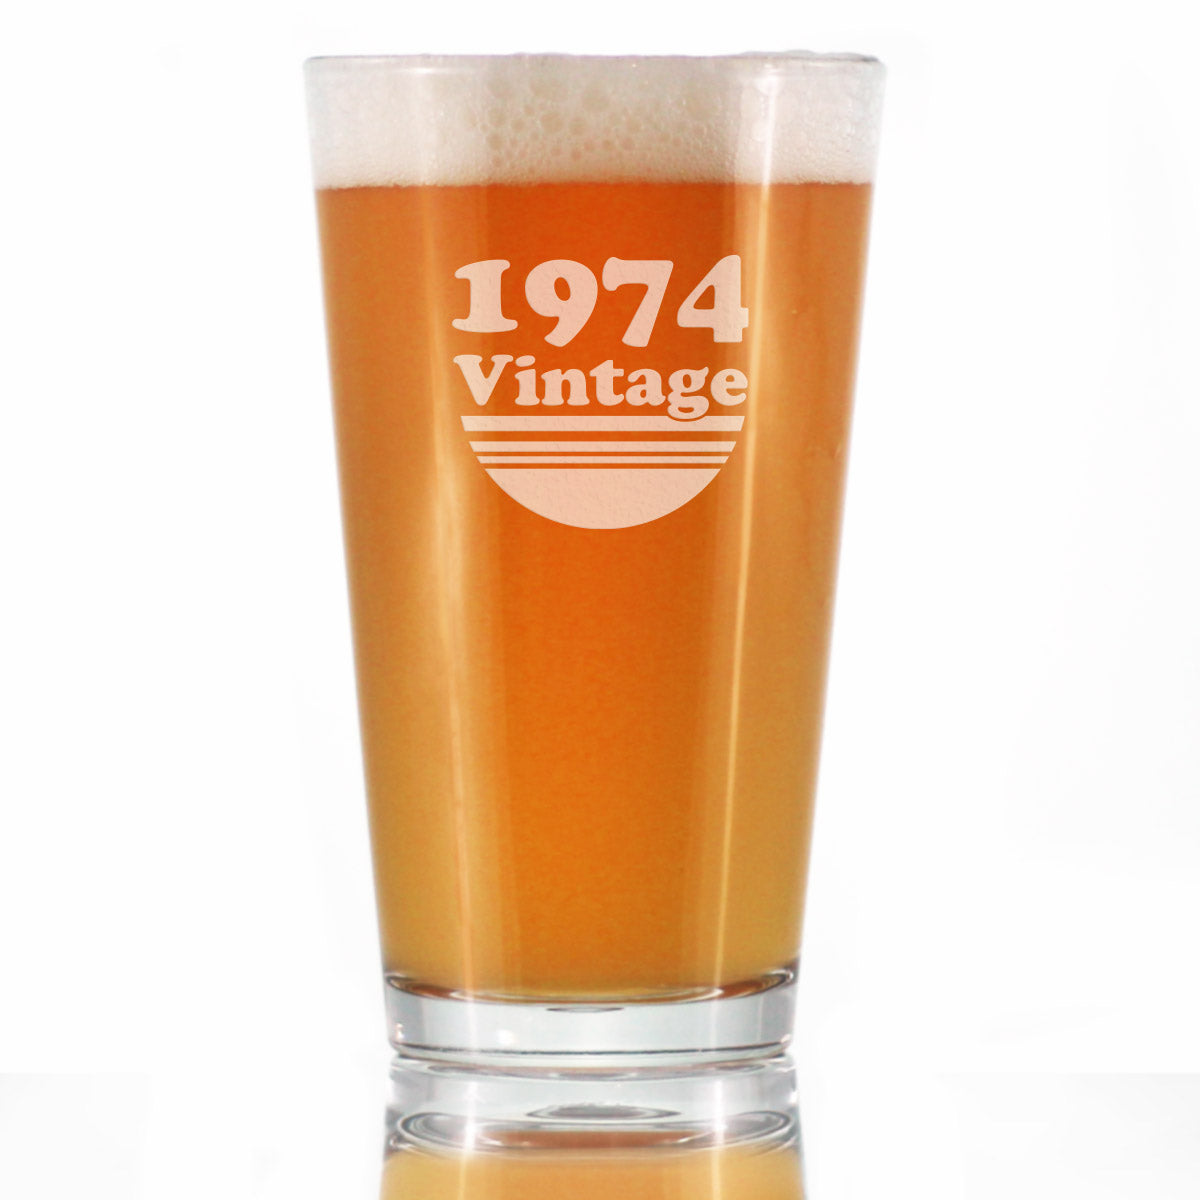 Vintage 1974 - Pint Glass for Beer - 49th Birthday Gifts for Men or Women Turning 49 - Fun Bday Party Decor - 16 oz